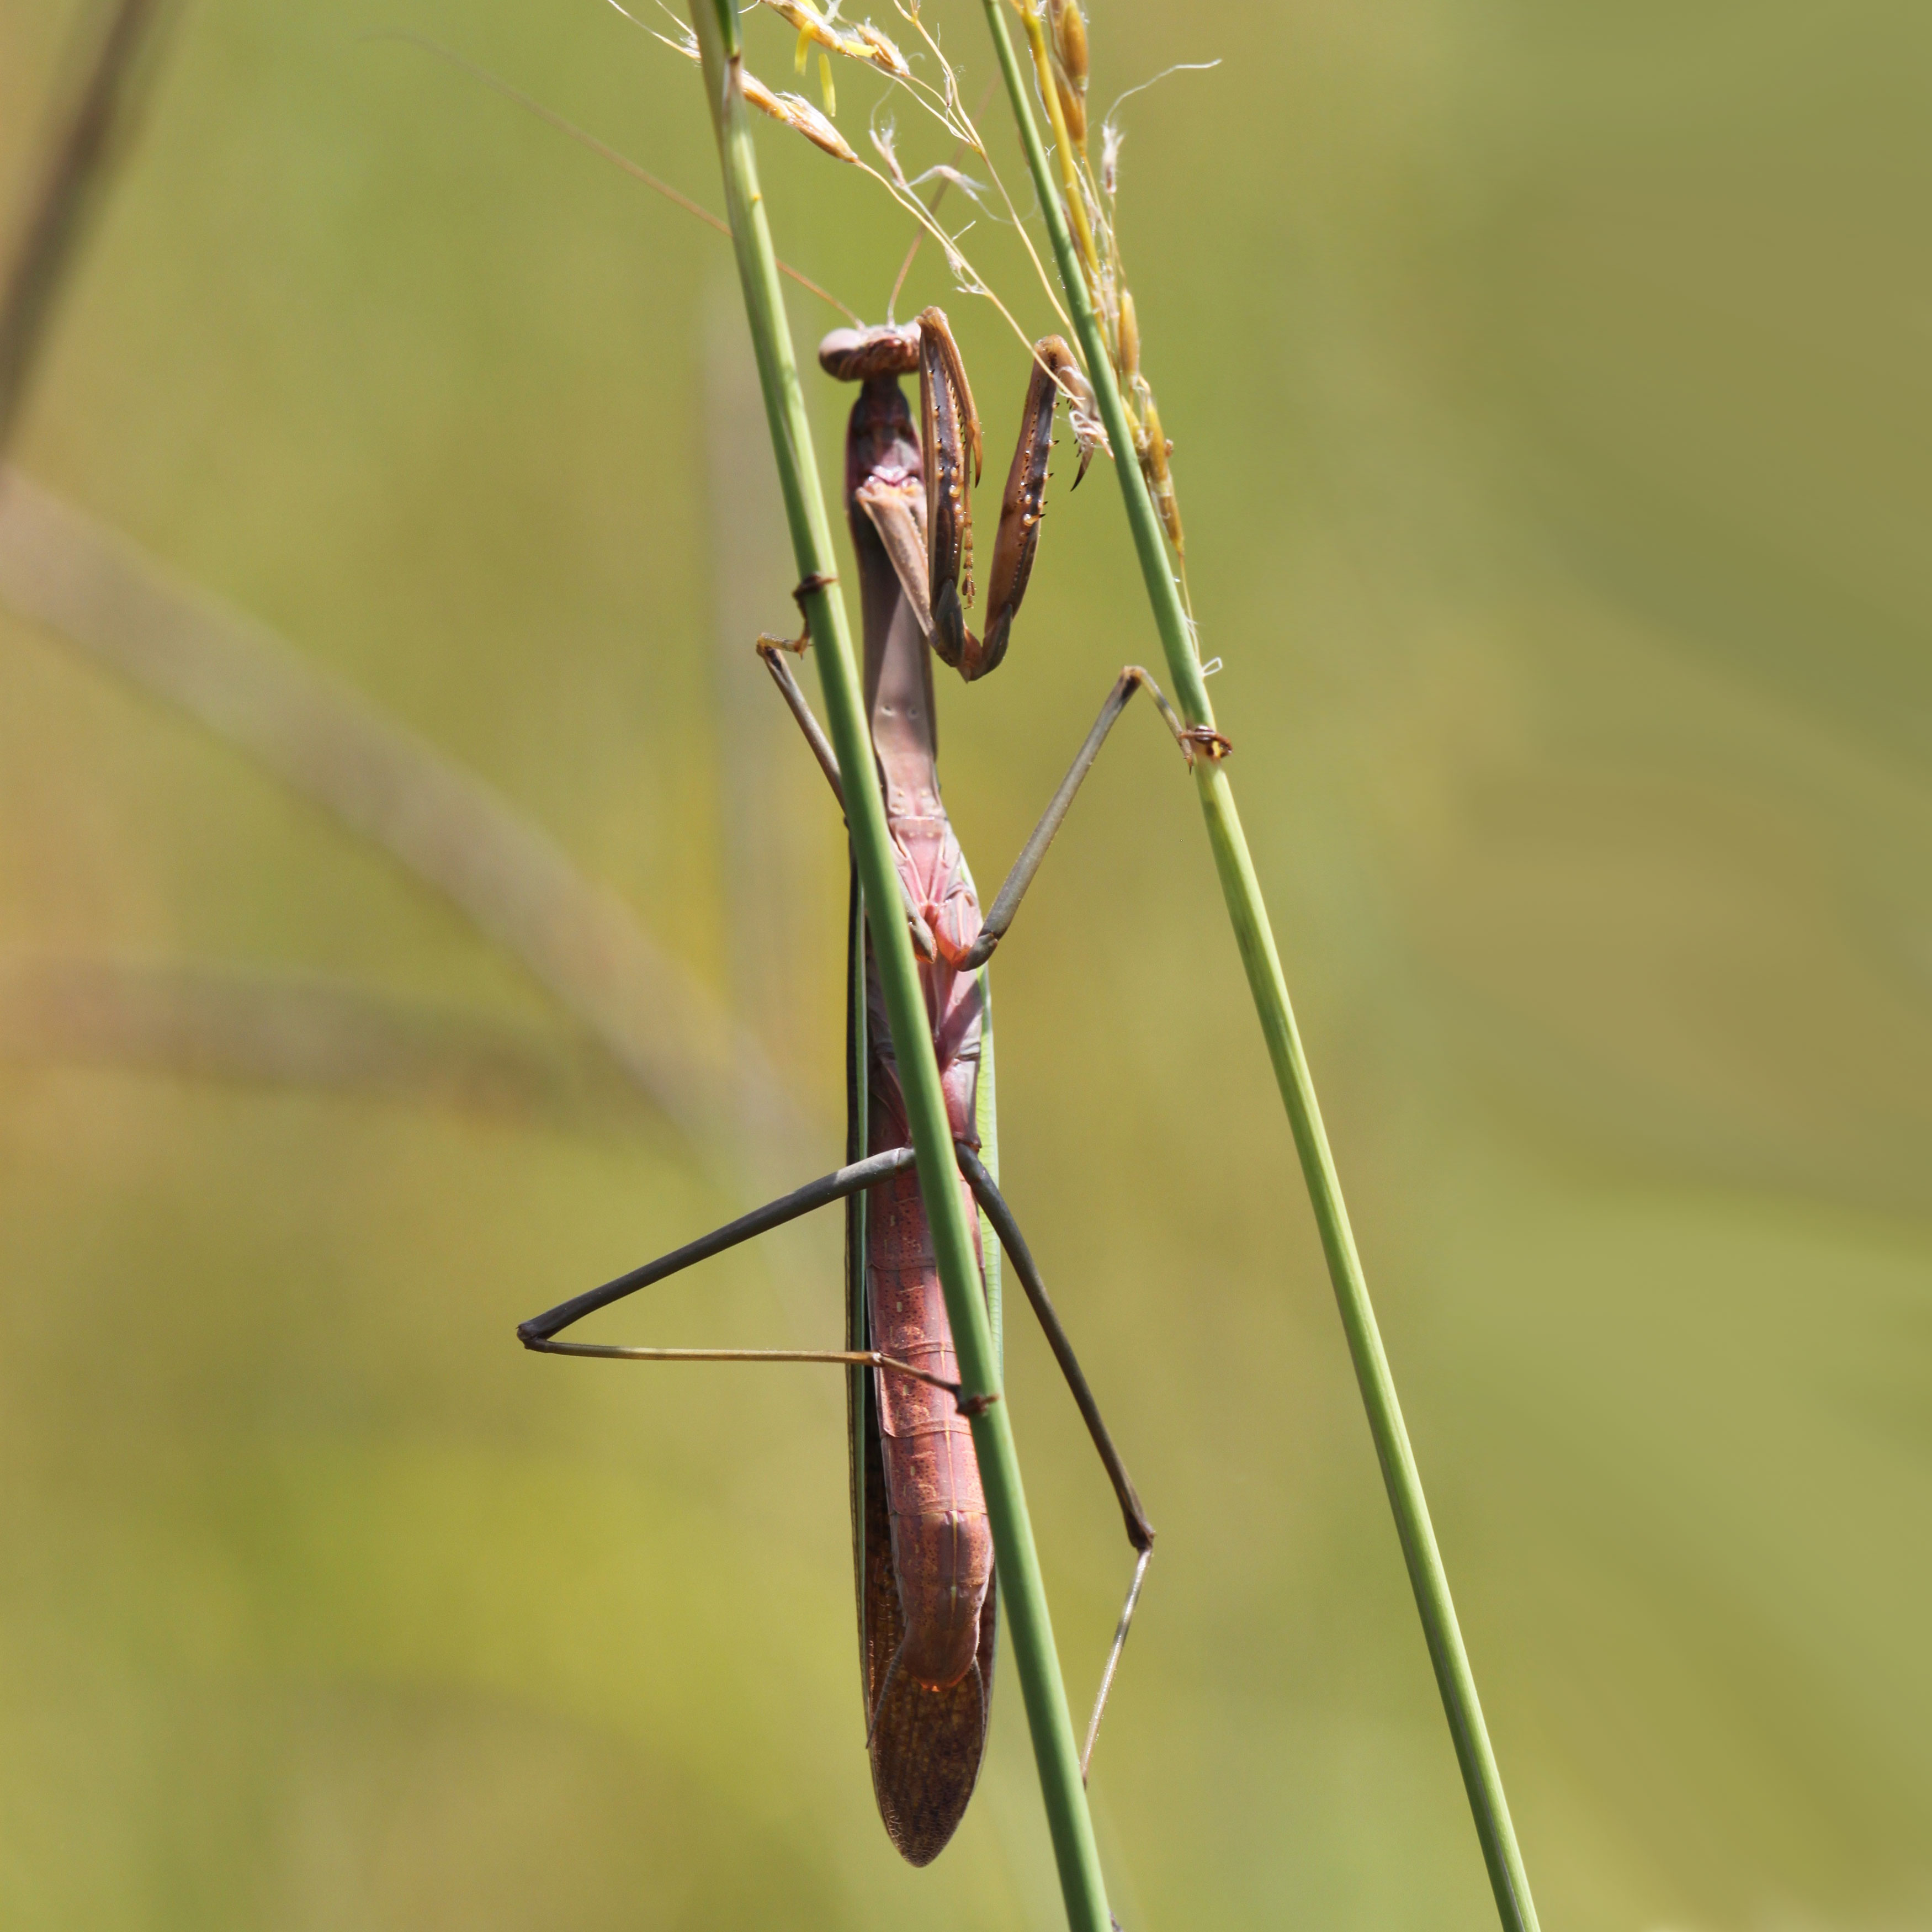 Large brown and green Chinese praying mantis on a stem of grass.